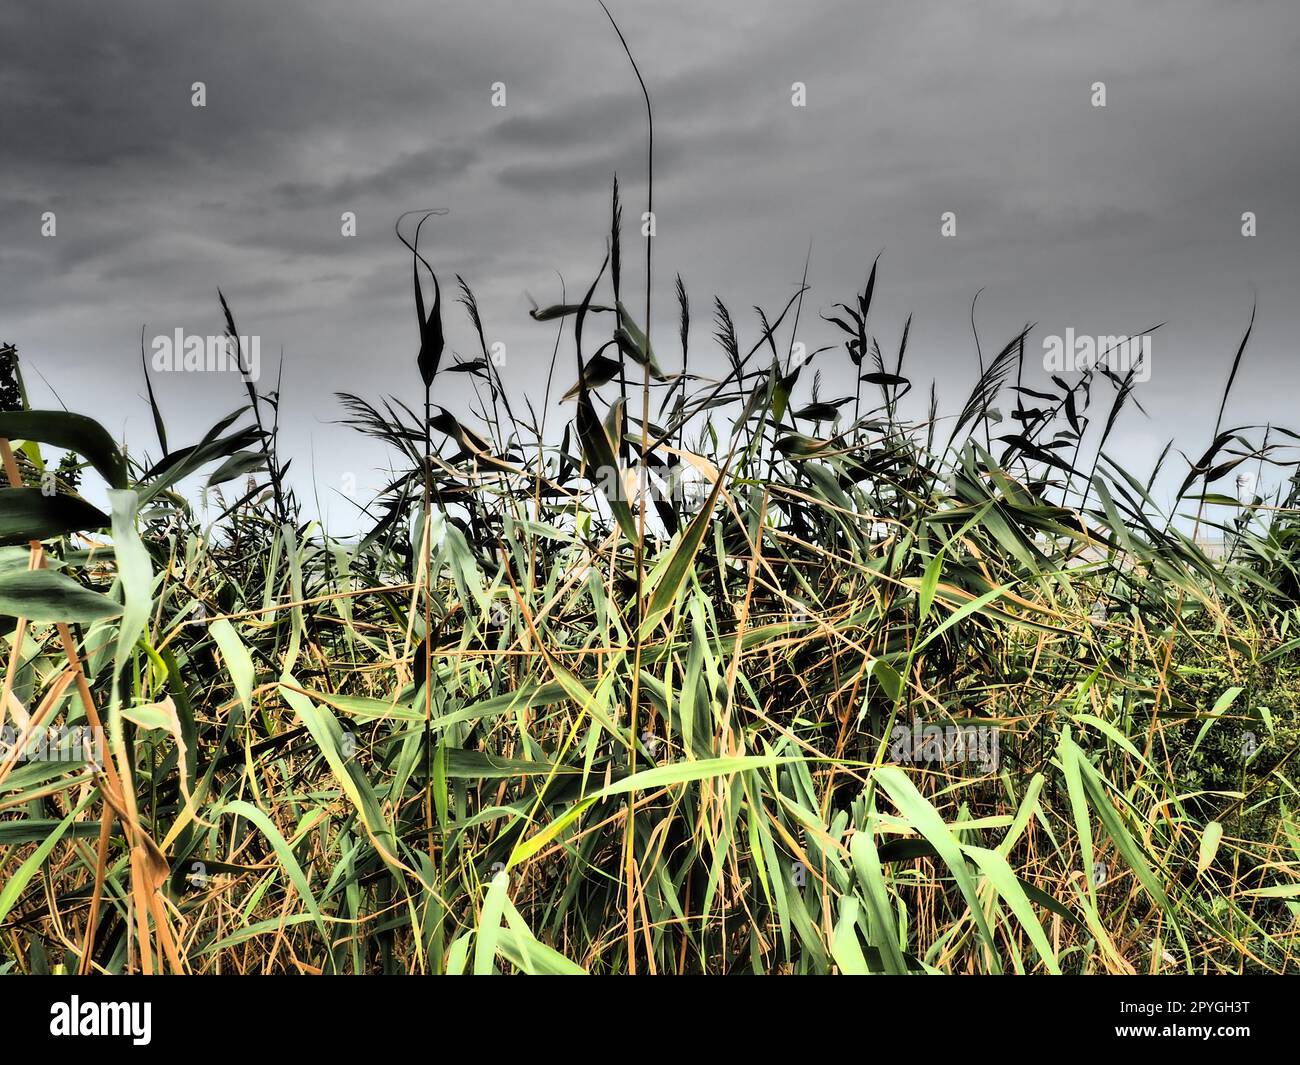 Common reed, or southern reed, Phragmites australis, a tall perennial grass of the genus Reed. Flora of the estuary. Moisture-loving plant. Soils with close standing groundwater. Stormy weather. Stock Photo